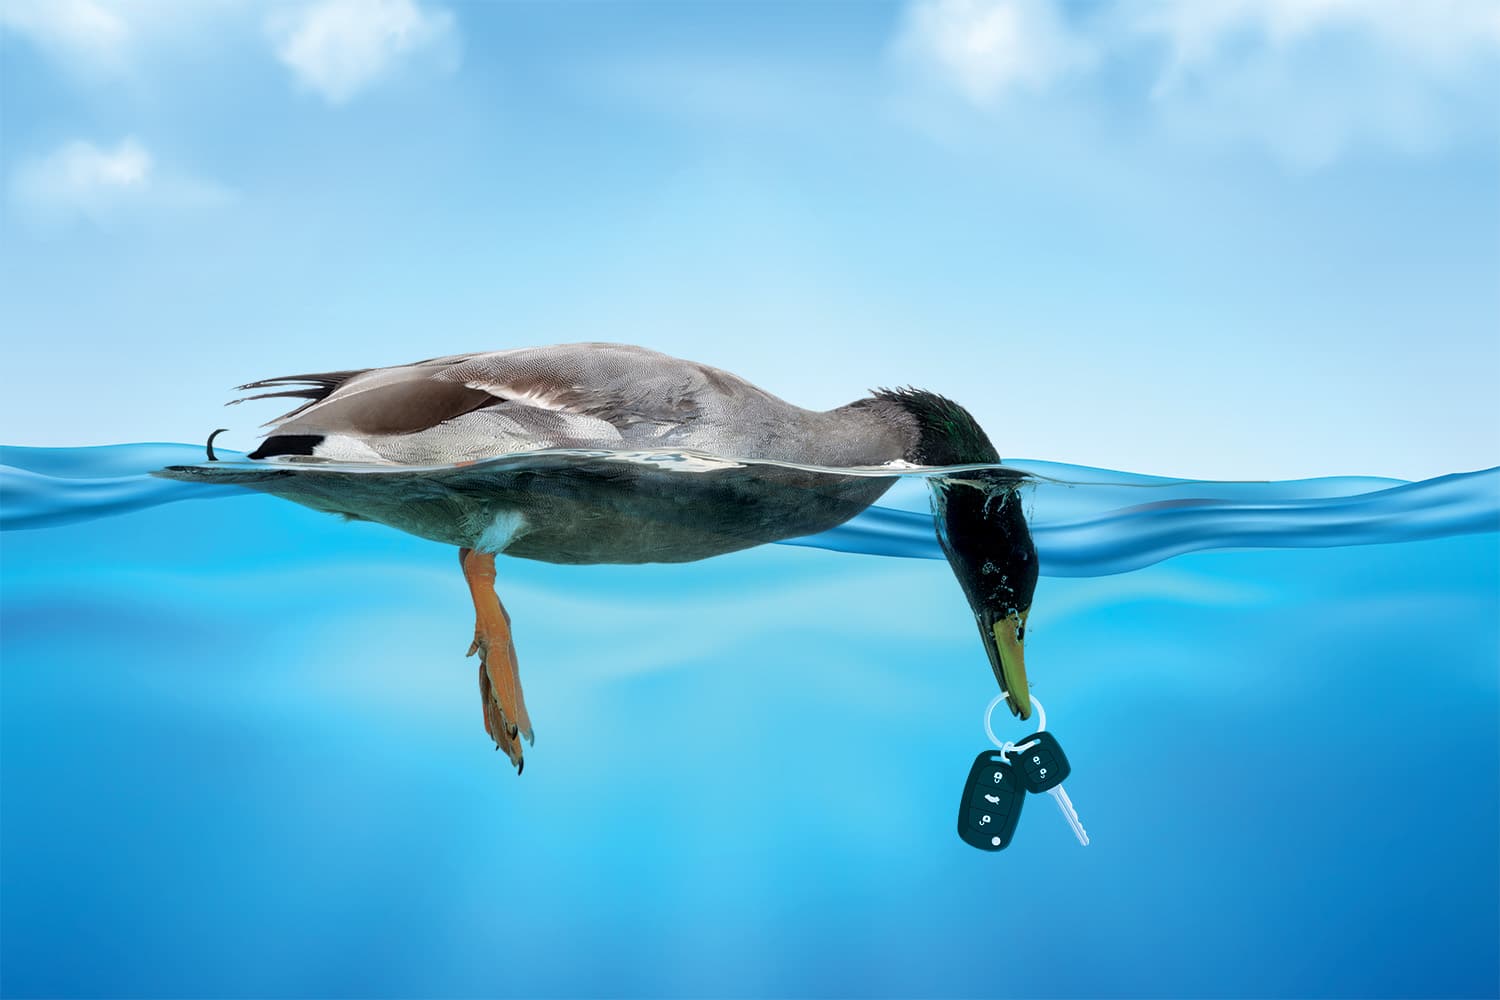 A duck swimming with a key in its mouth.